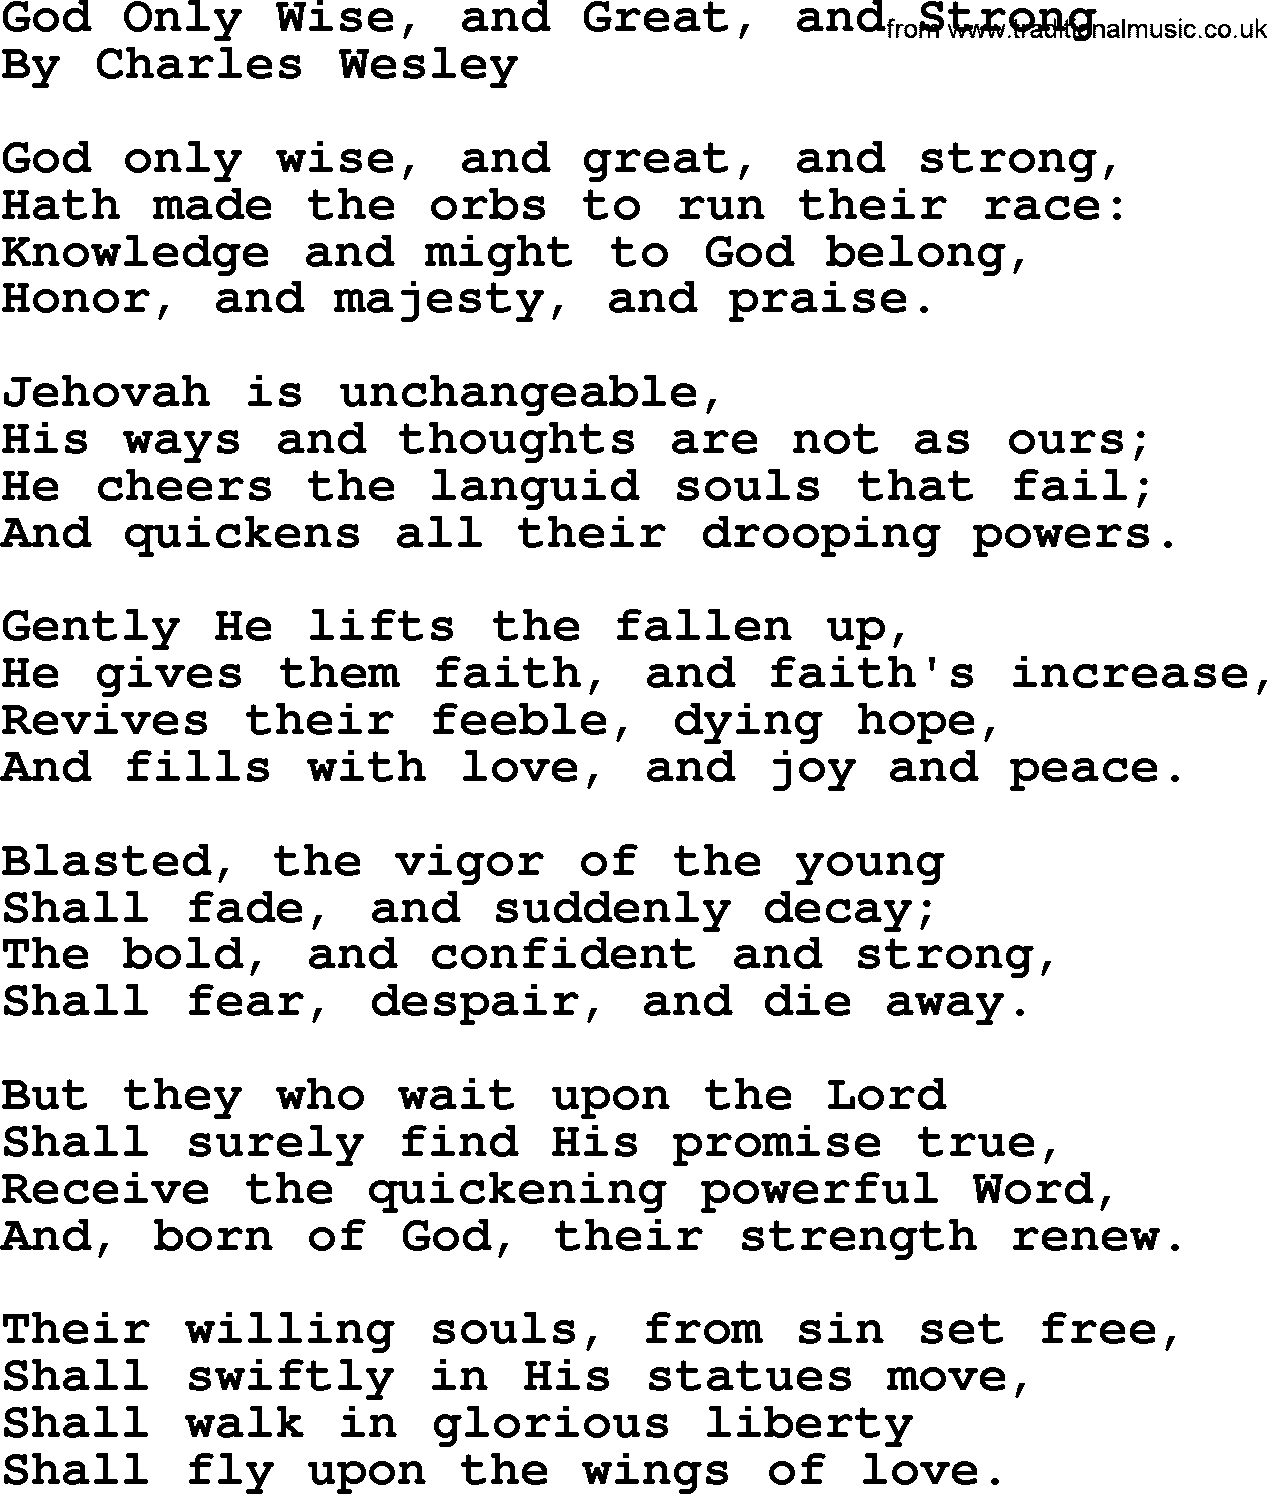 Charles Wesley hymn: God Only Wise, and Great, and Strong, lyrics